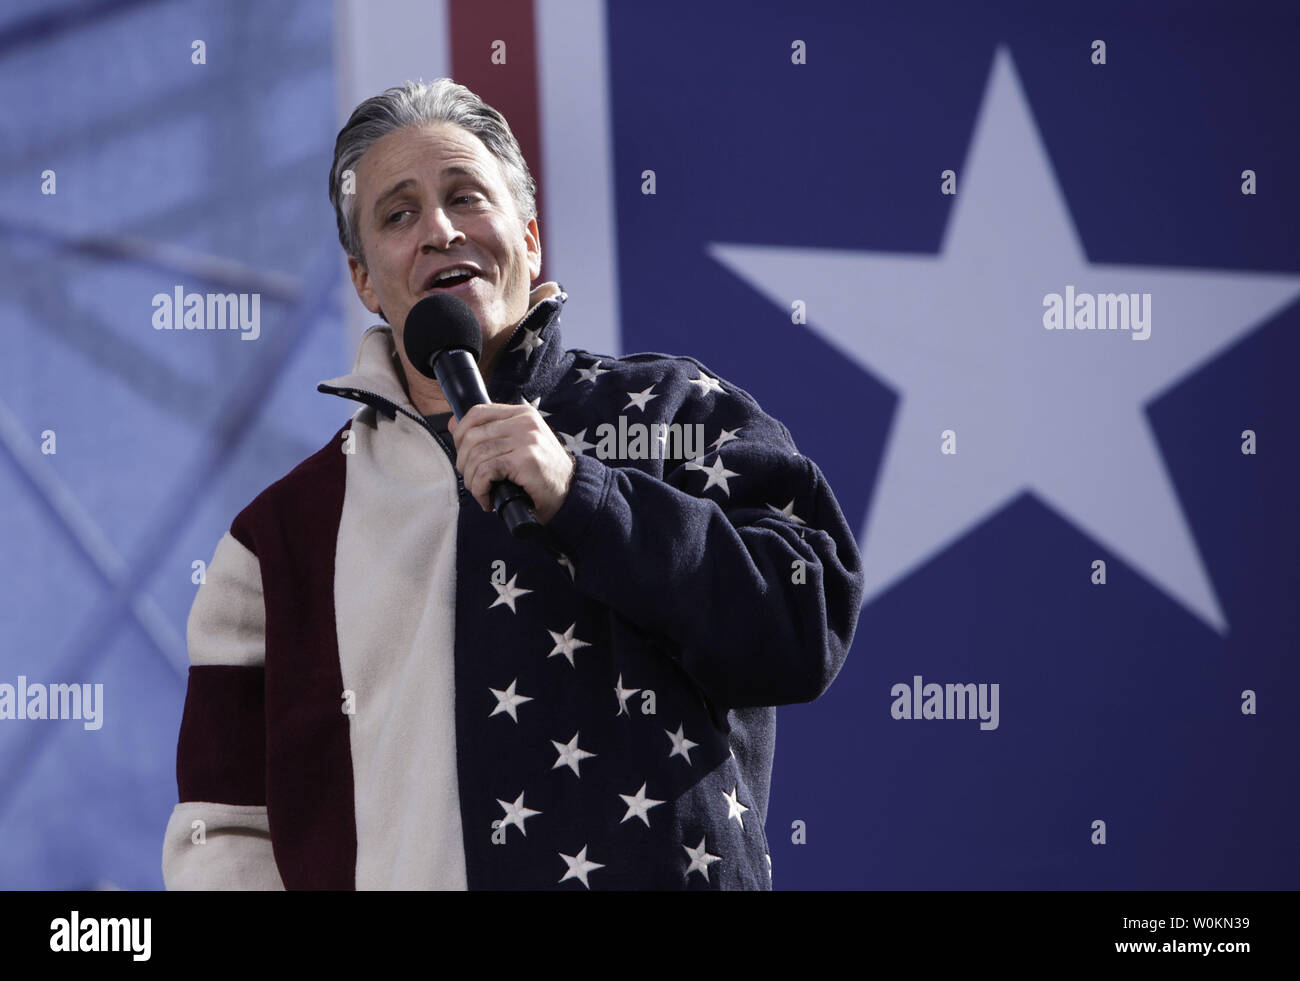 Comedy Central comedians Jon Stewart  performs during the 'Rally to Restore Sanity And/Or Fear' on the National Mall in Washington on October 30, 2010. UPI Photo/Yuri Gripas.. Stock Photo